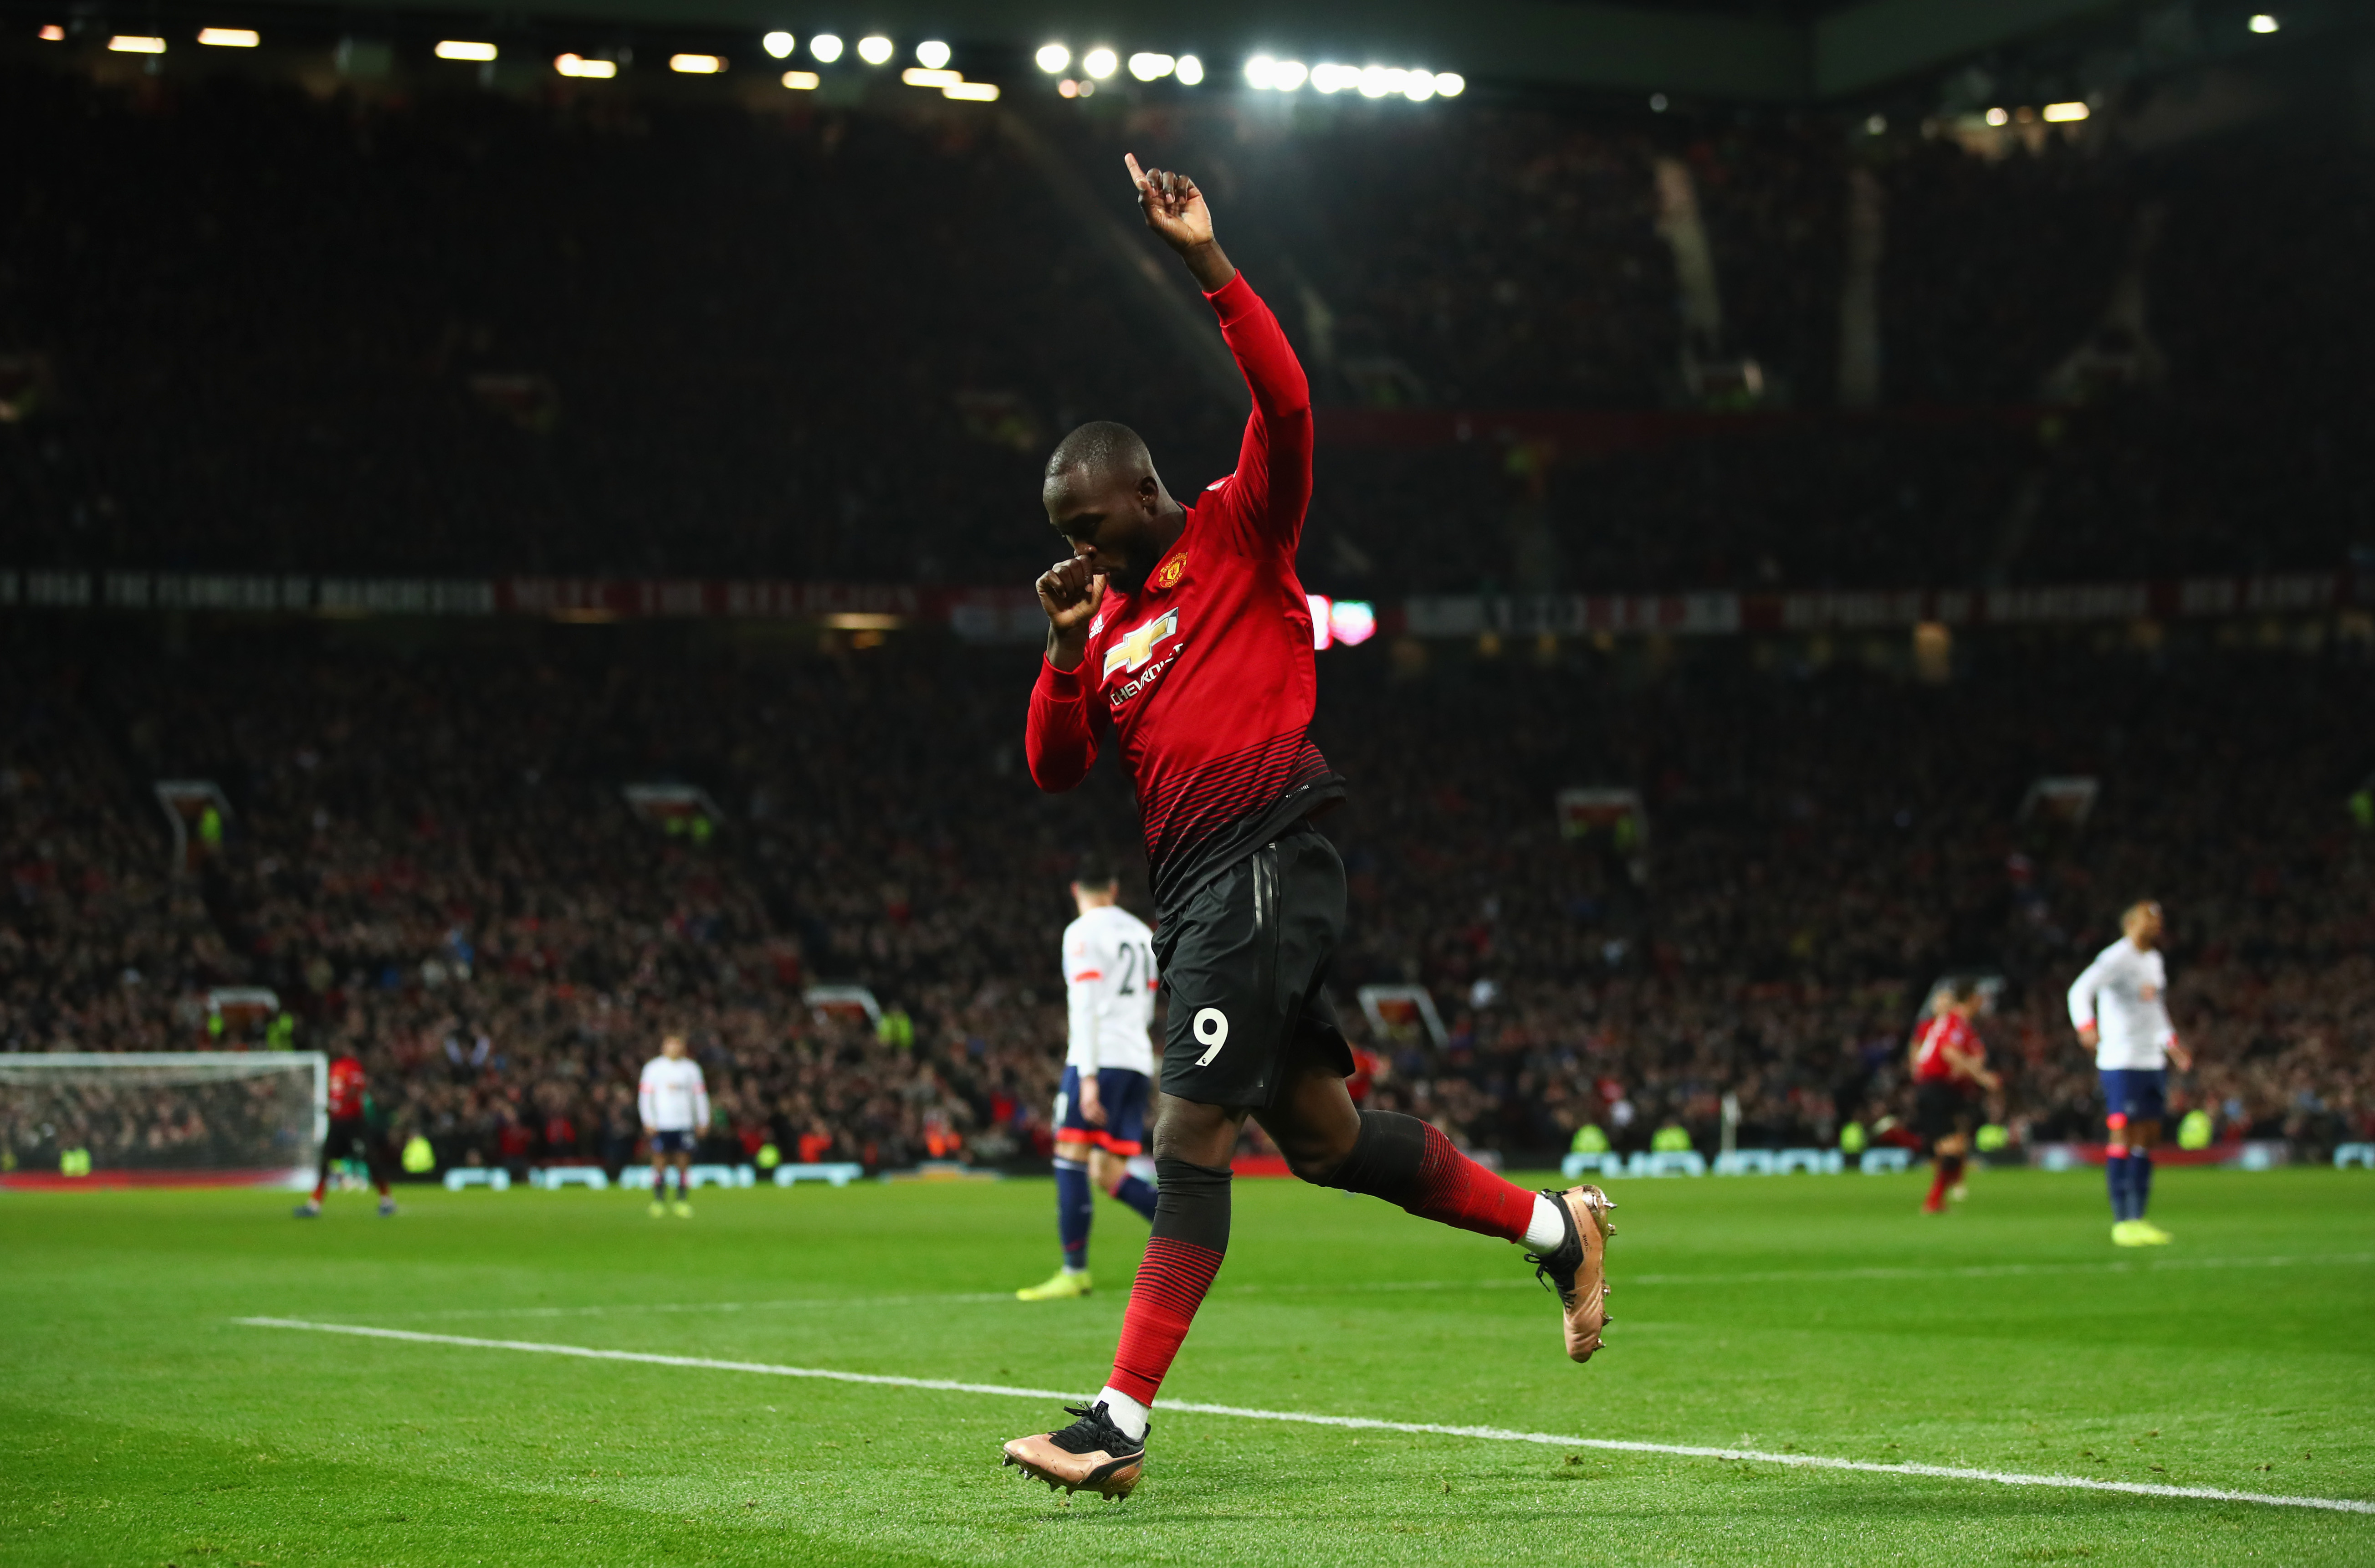 MANCHESTER, ENGLAND - DECEMBER 30:  Romelu Lukaku of Manchester United celebrates after scoring his team's fourth goal during the Premier League match between Manchester United and AFC Bournemouth at Old Trafford on December 30, 2018 in Manchester, United Kingdom.  (Photo by Clive Brunskill/Getty Images)